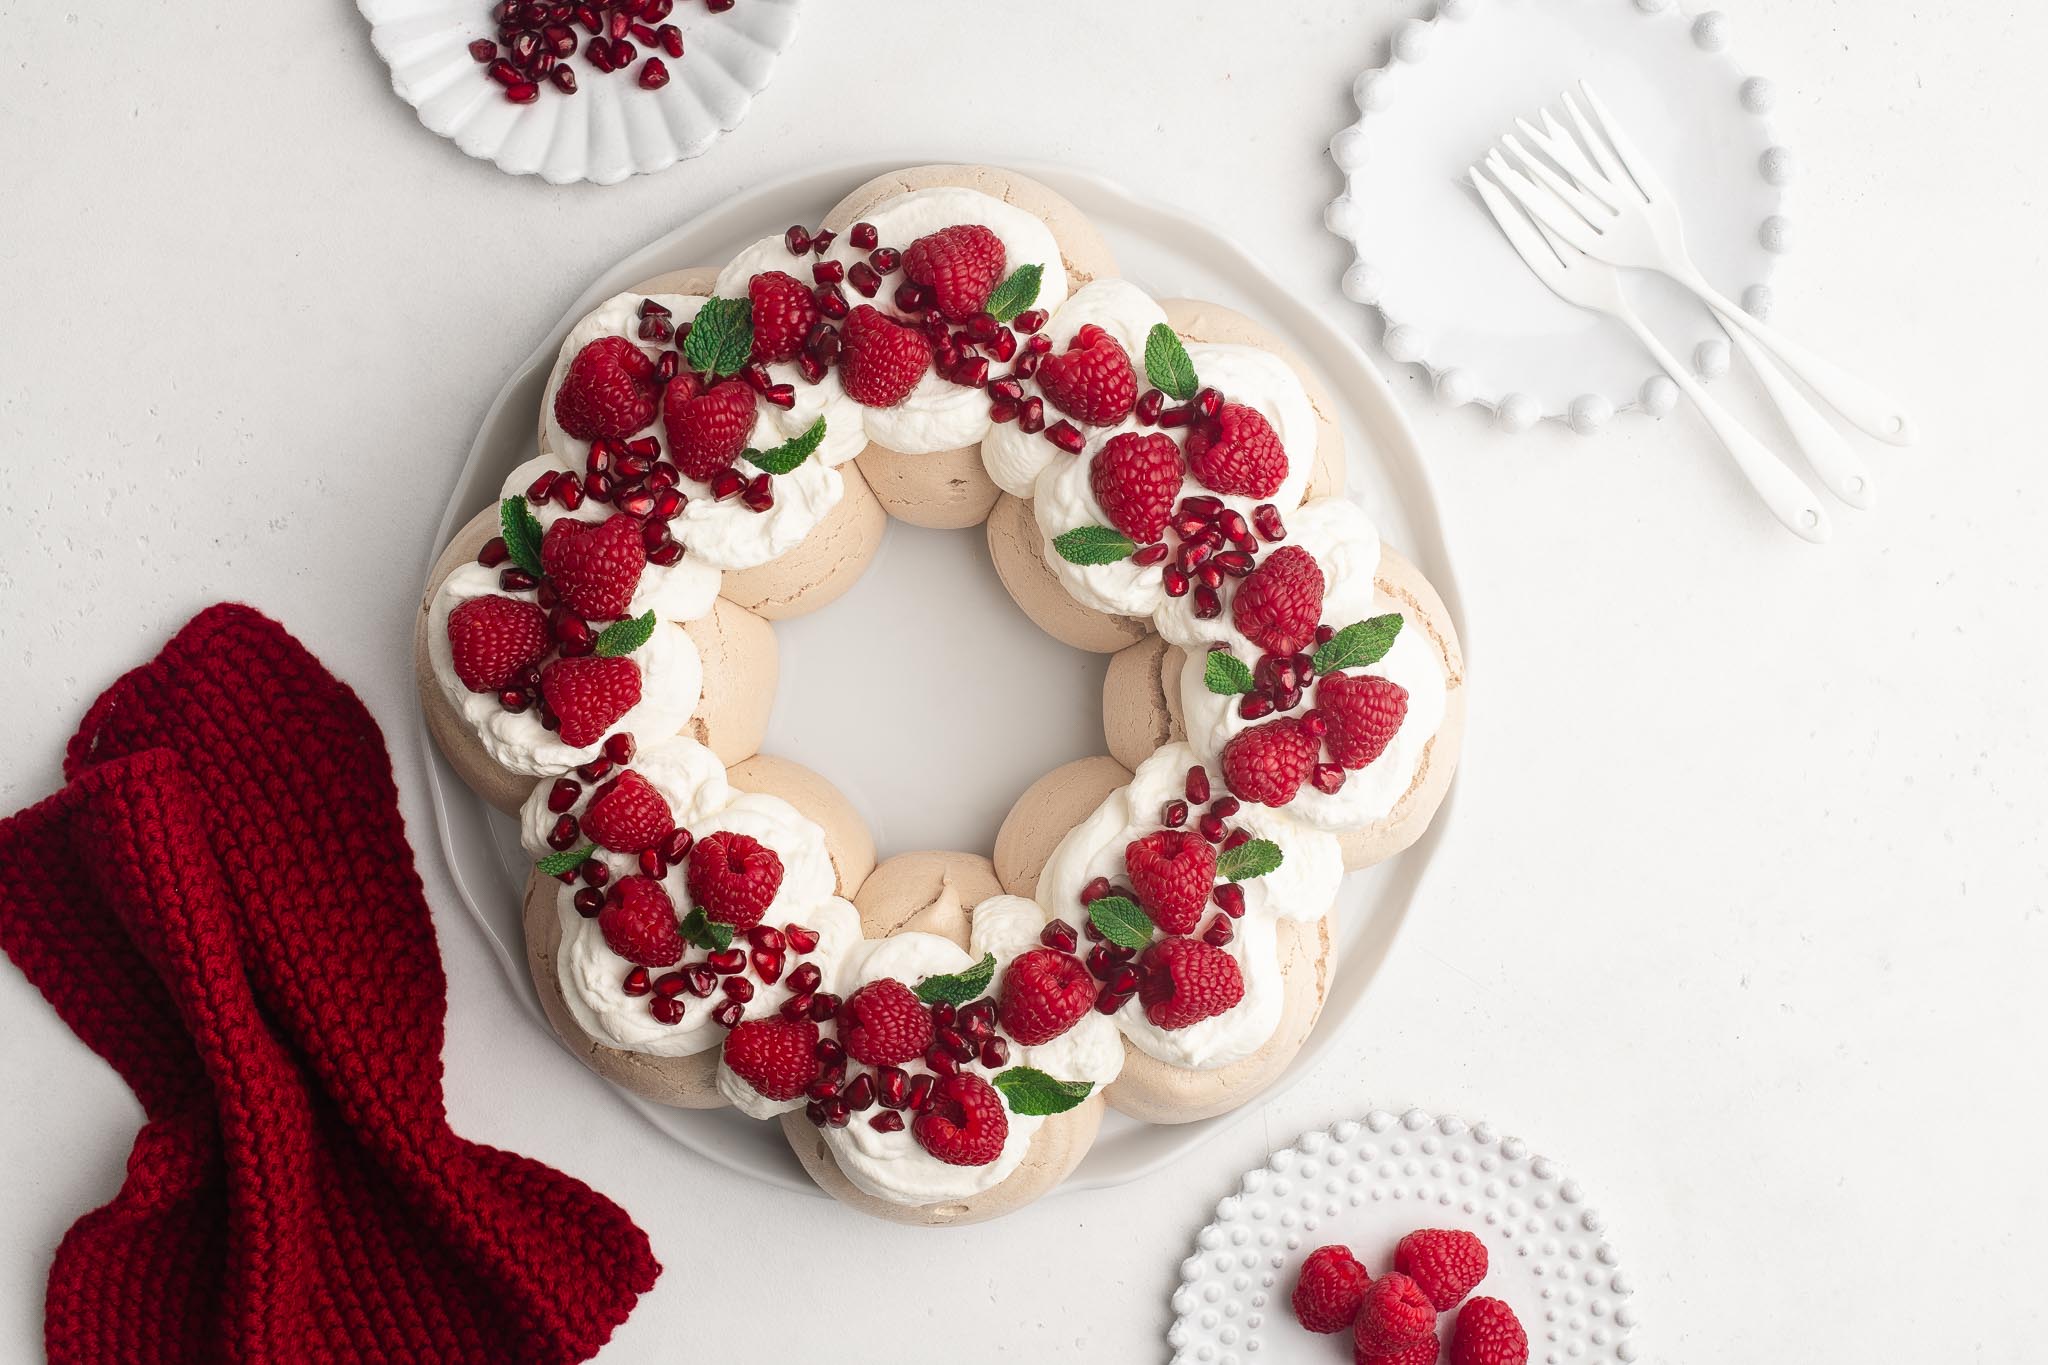 pavlova wreath with fresh berries on a white cake plate